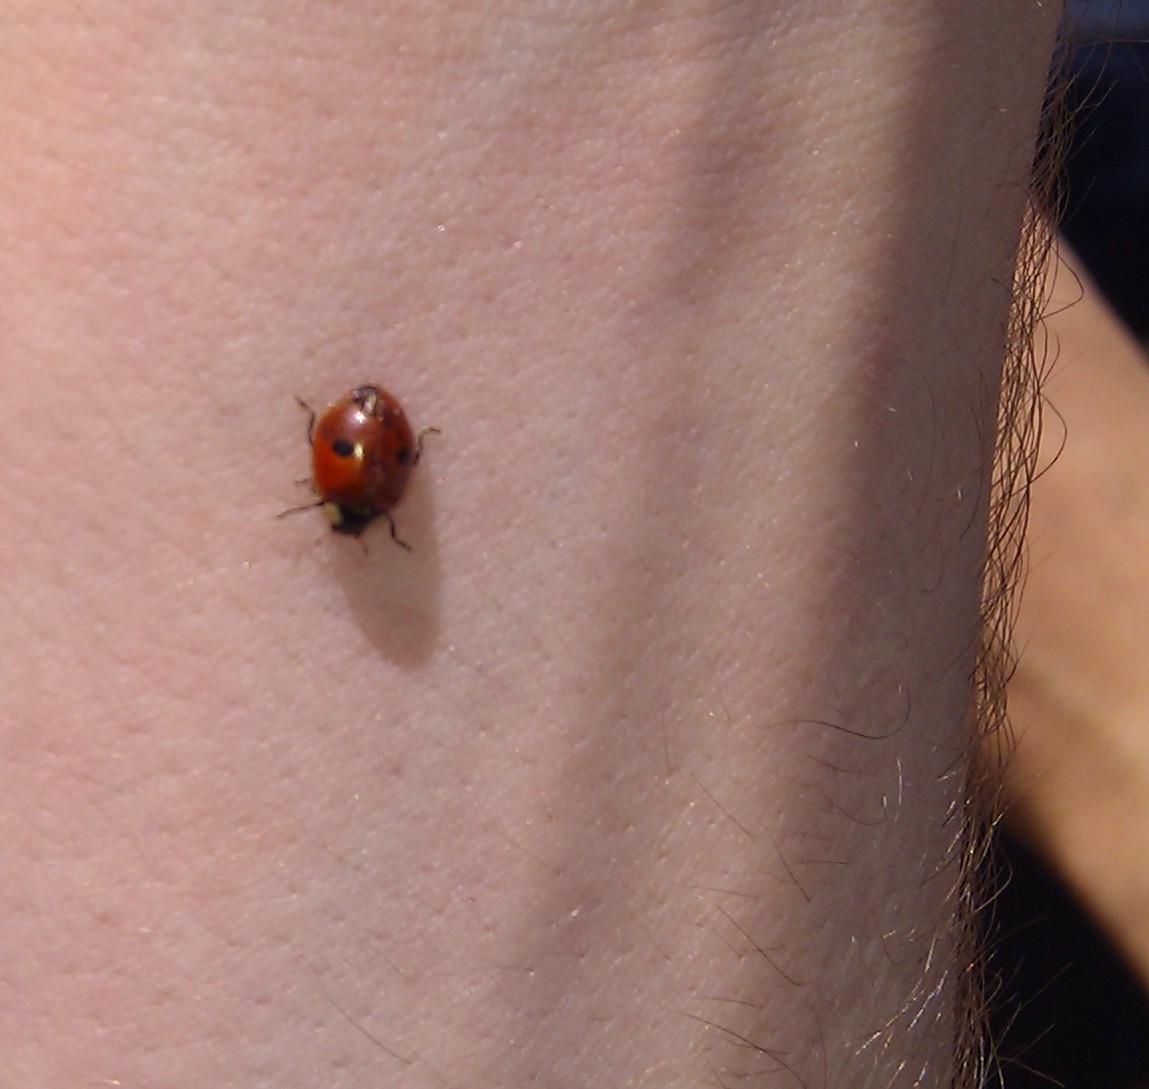 Two-spotted ladybug